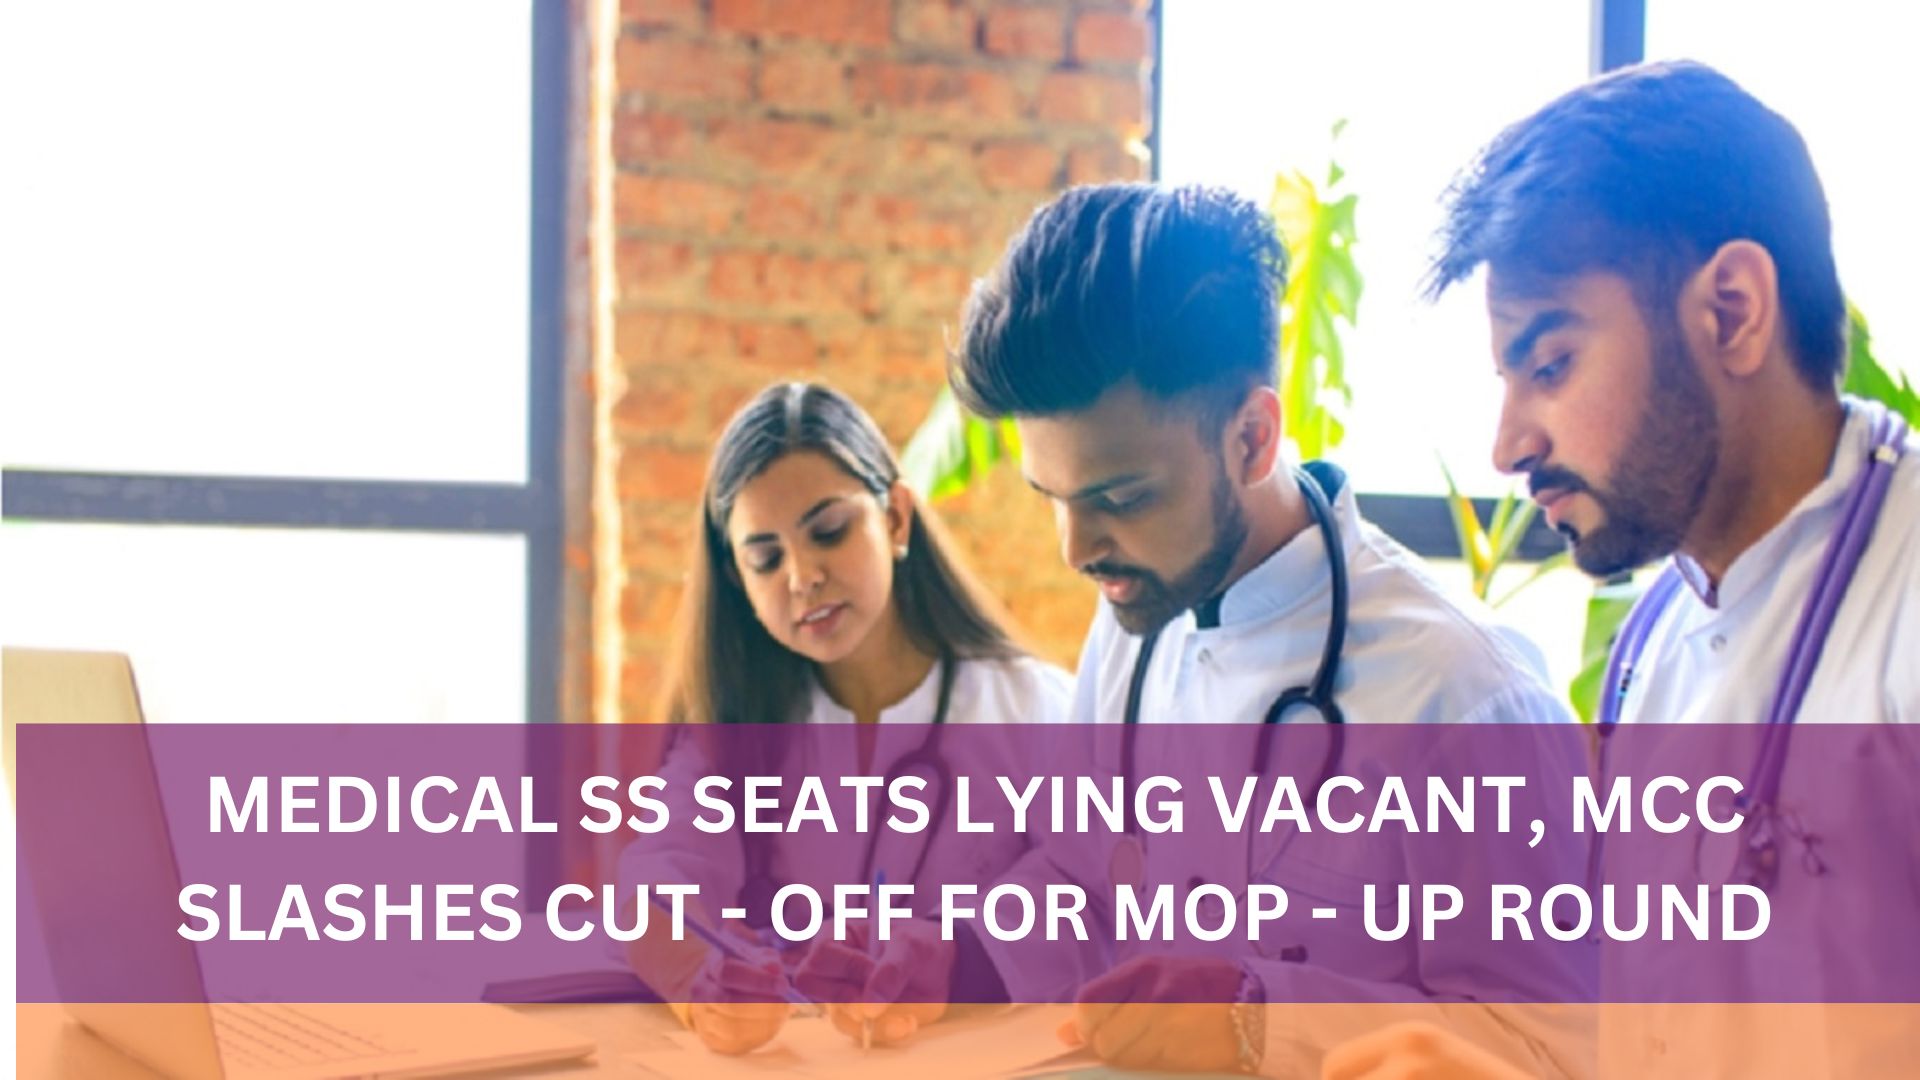 MEDICAL SS SEATS LYING VACANT, MCC SLASHES CUT - OFF FOR MOP - UP ROUND